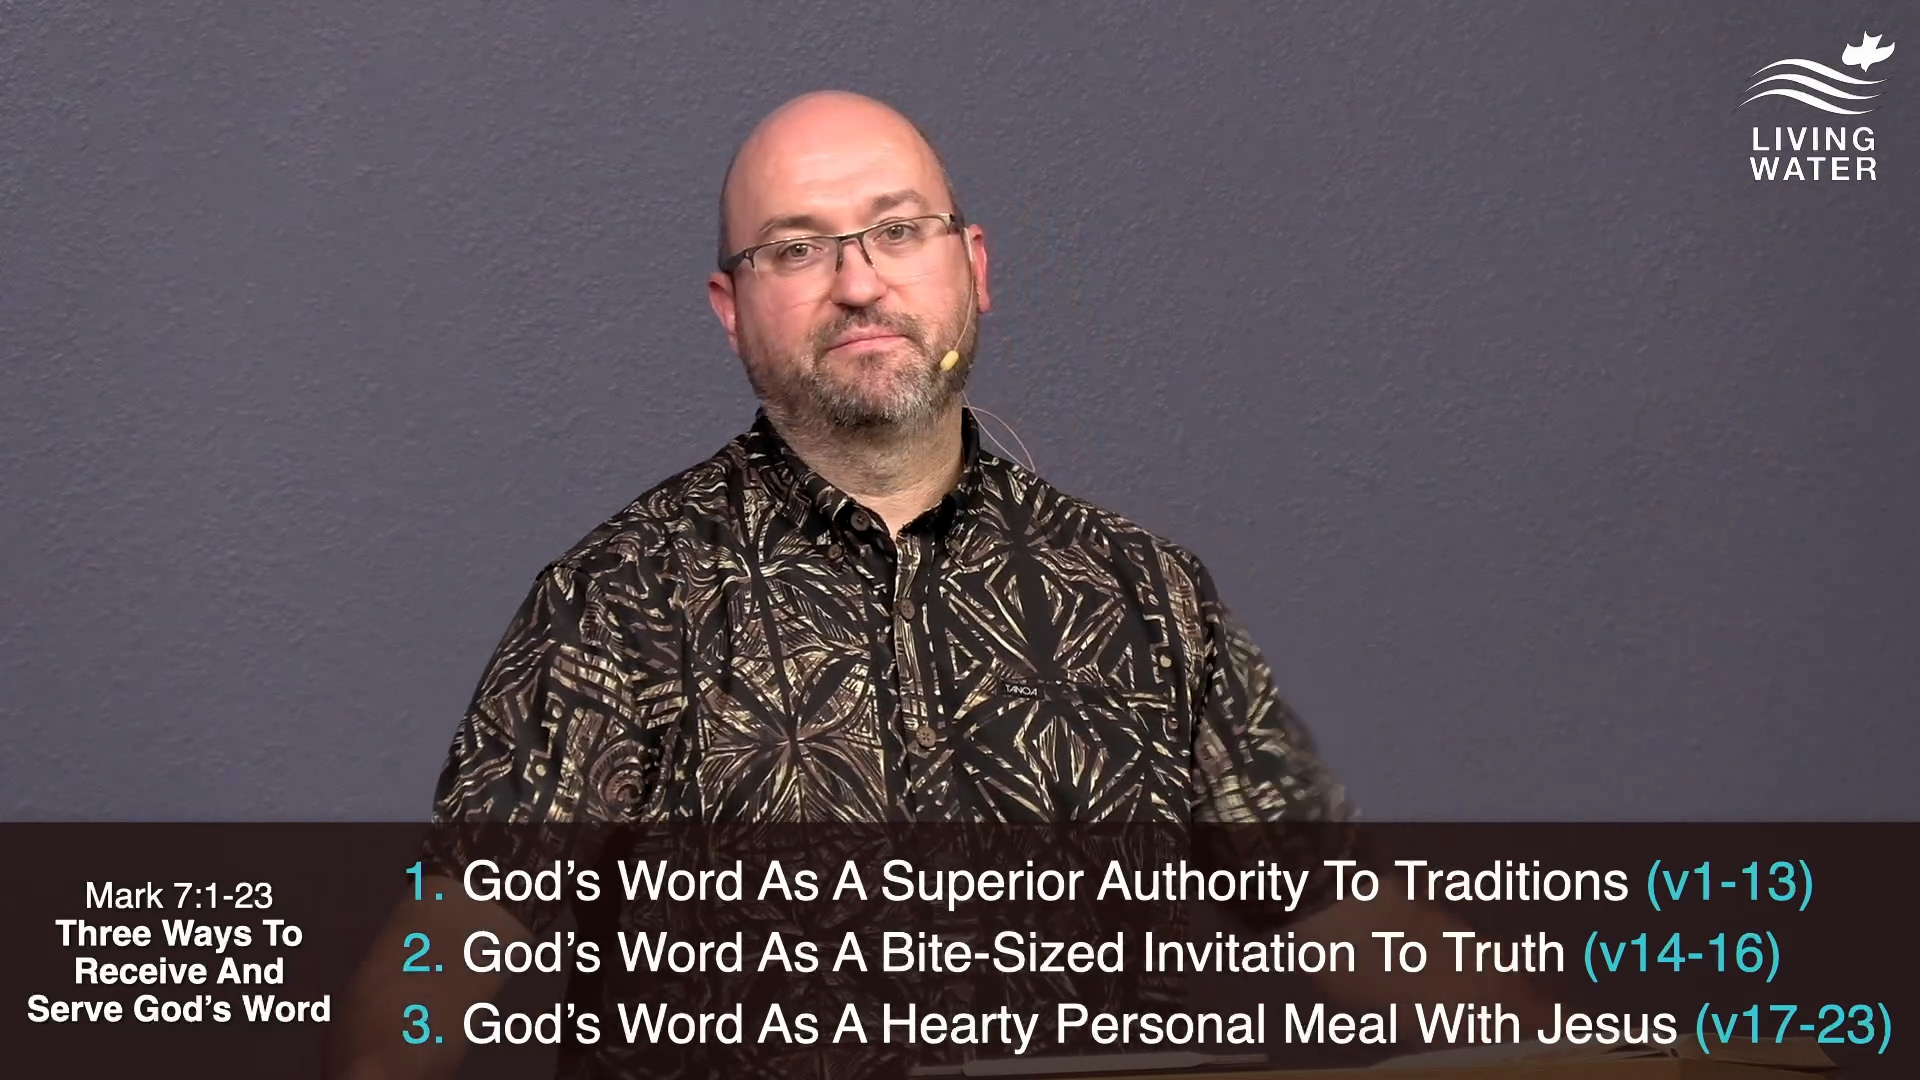 Pastor Jerry Simmons teaching Mark 7:1-23, Three Ways To Receive And Serve God’s Word